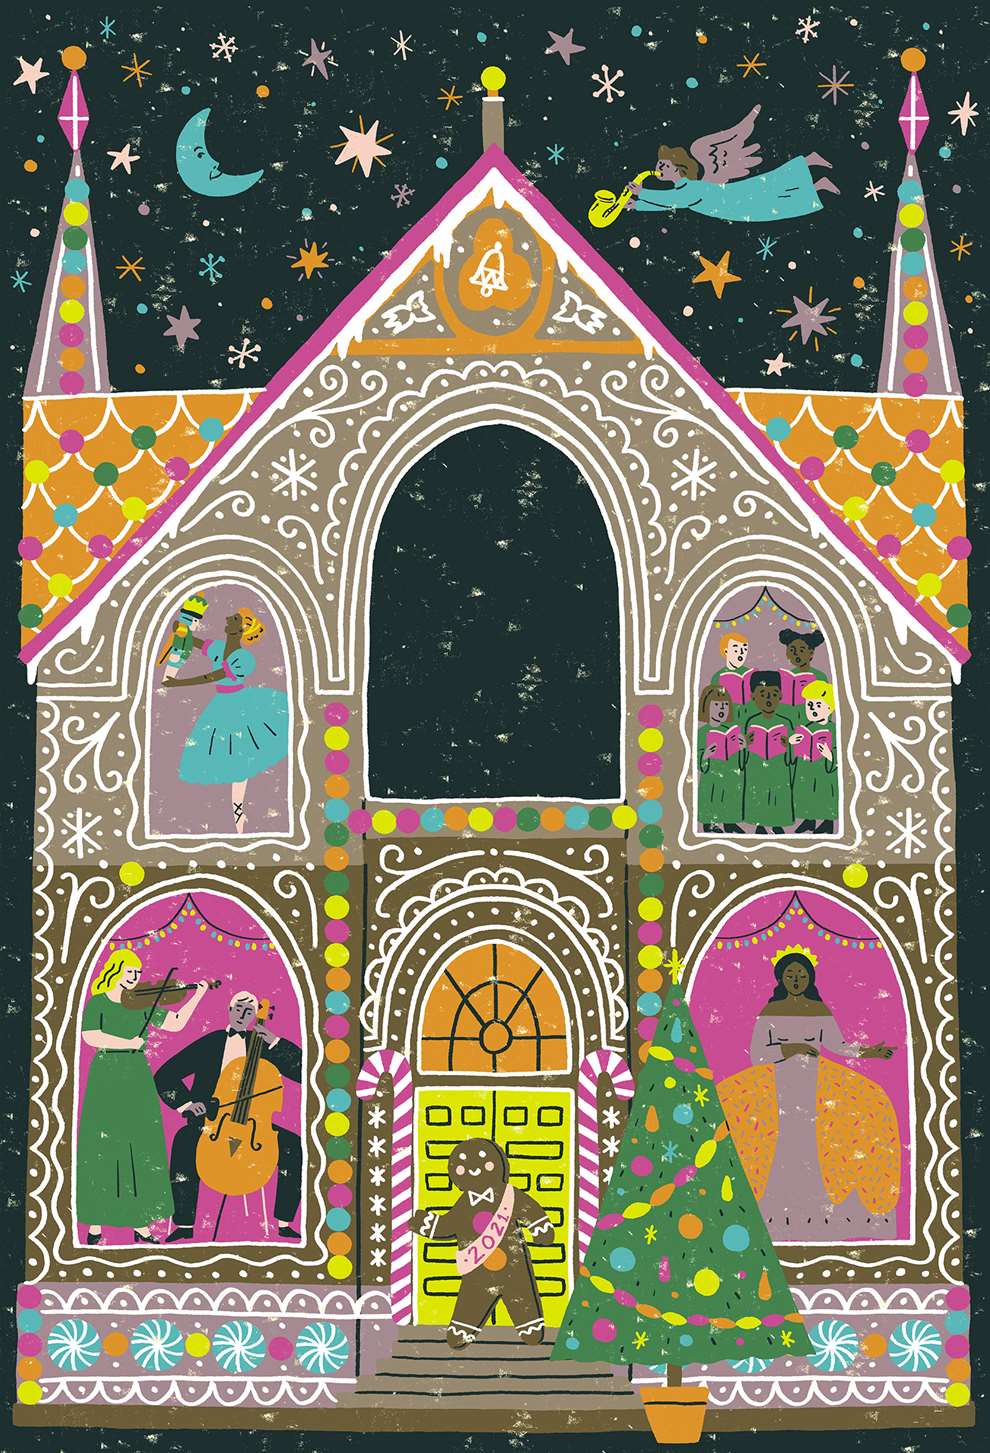 Harriet Seed, Digital illustration for Boston Globe cover of cathedral. 